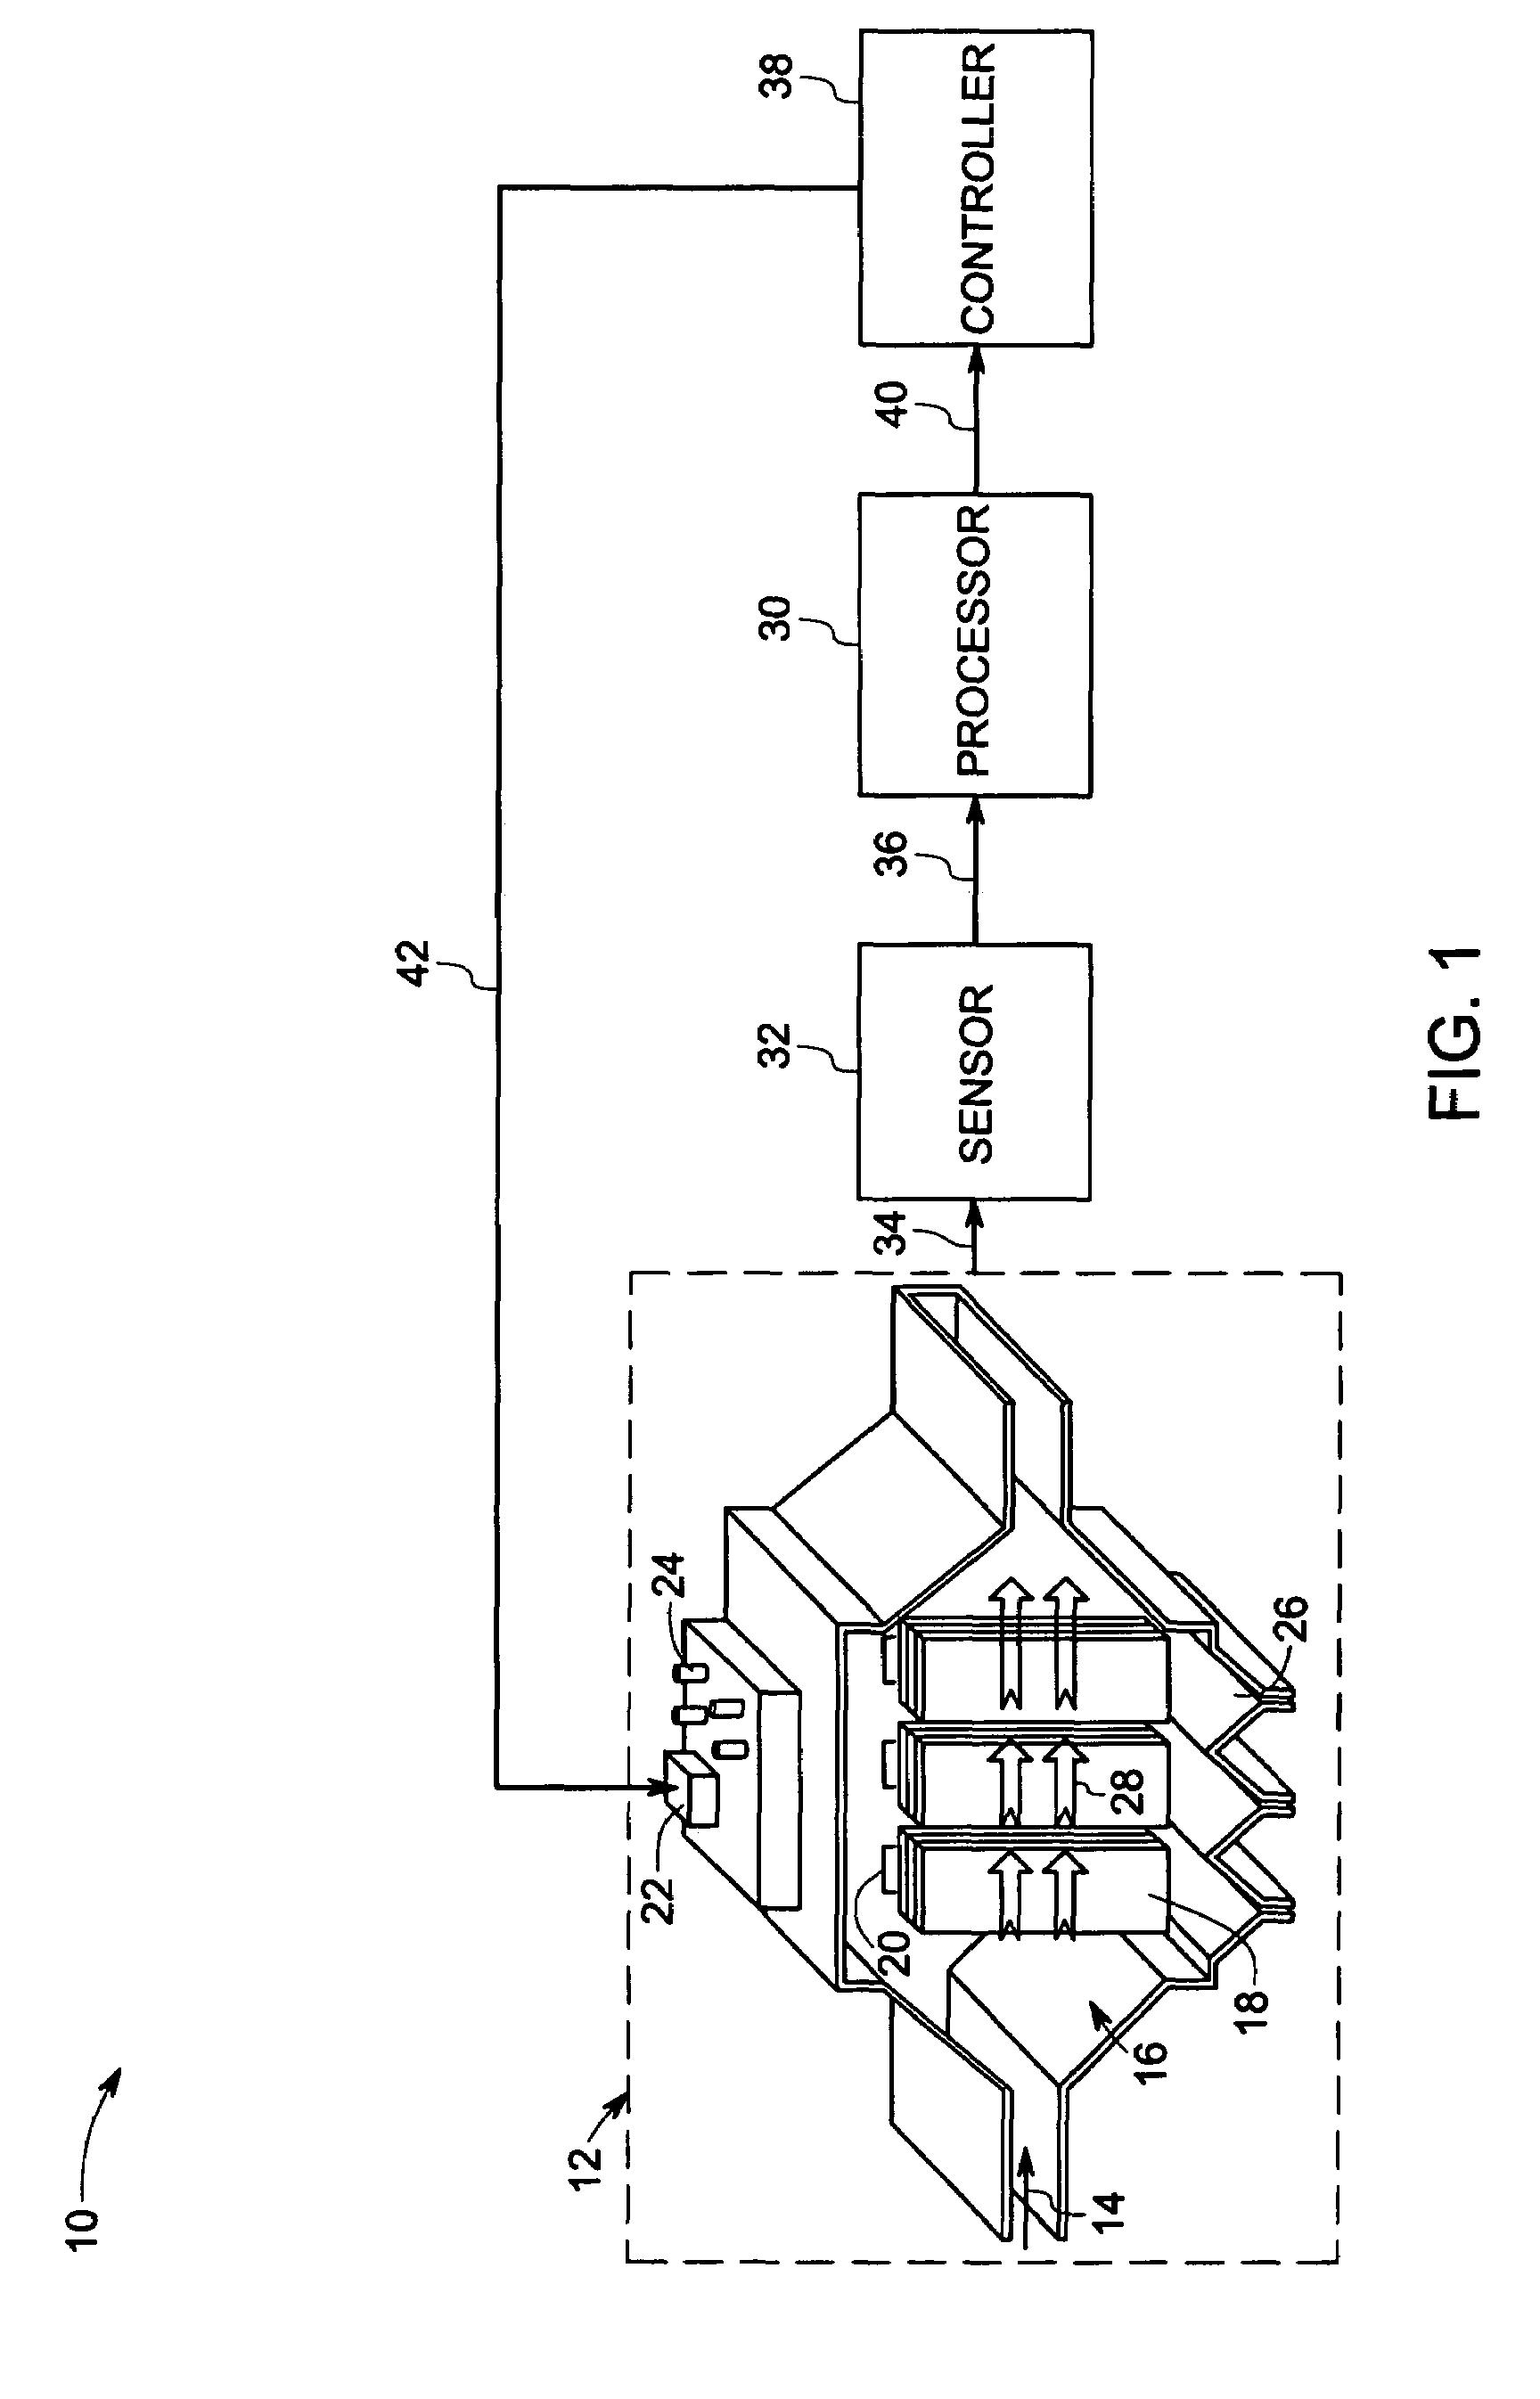 System and method for applying partial discharge analysis for electrostatic precipitator